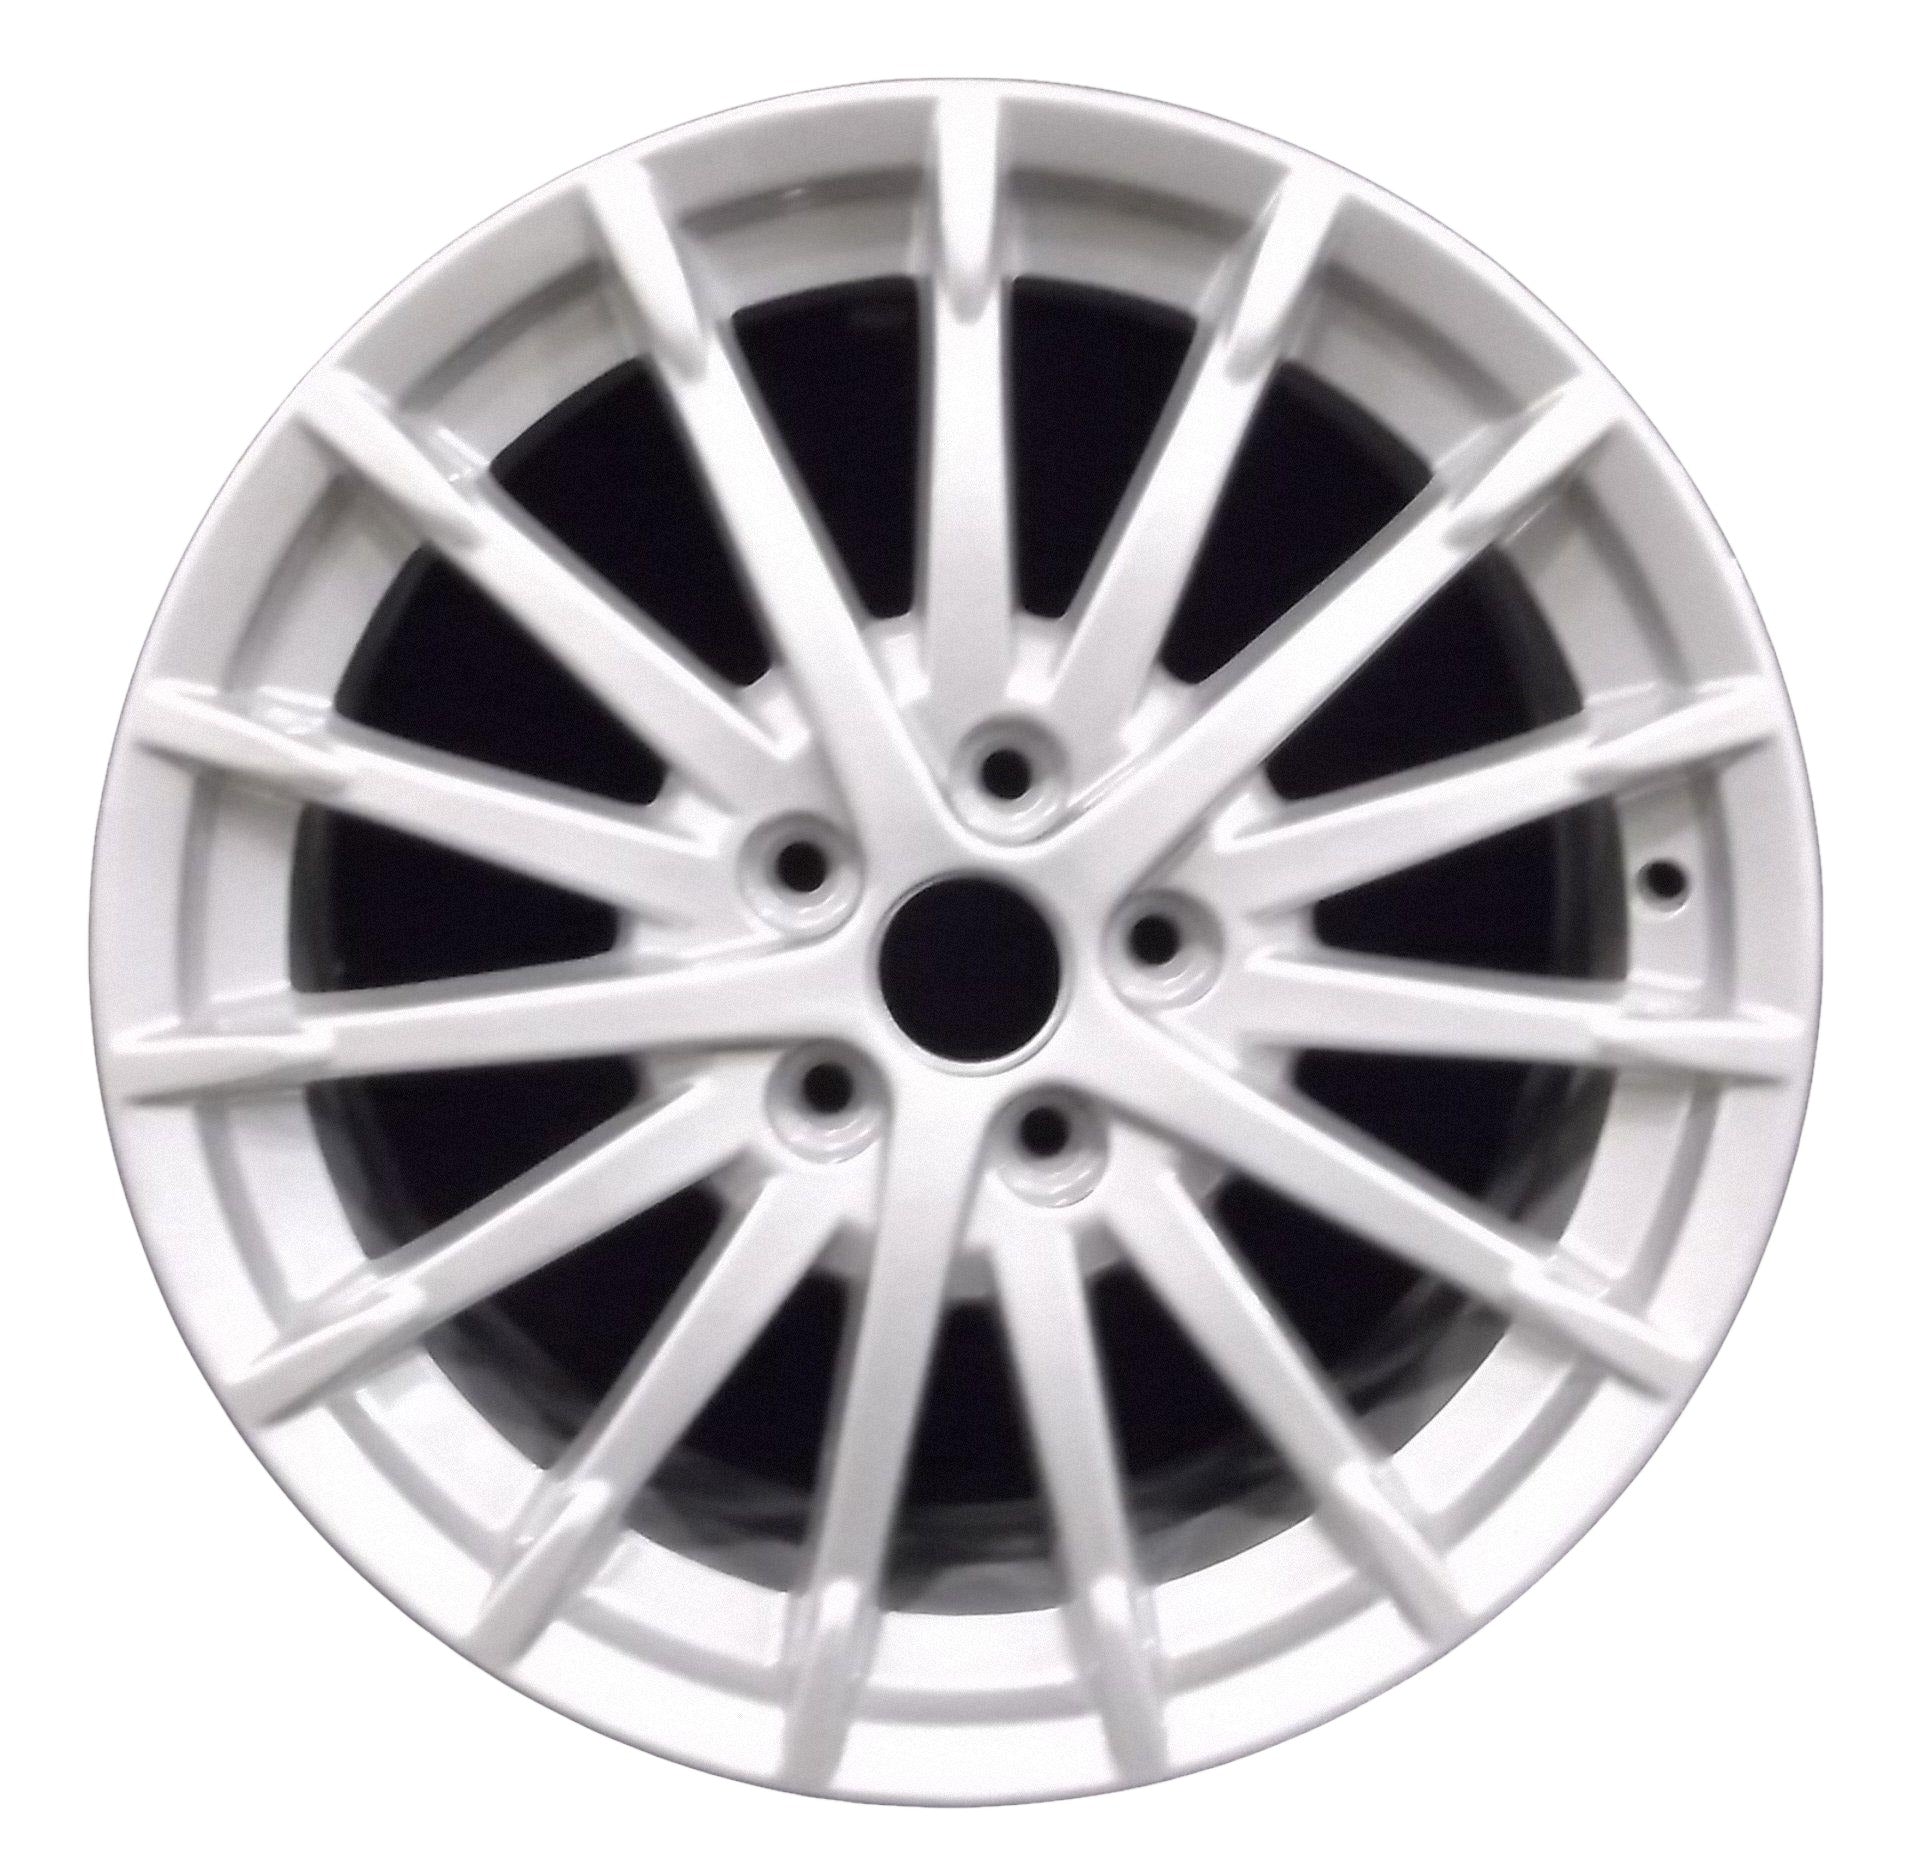 Ford Focus  2012, 2013, 2014, 2015, 2016, 2017, 2018 Factory OEM Car Wheel Size 17x7 Alloy WAO.3898.PS08.FF